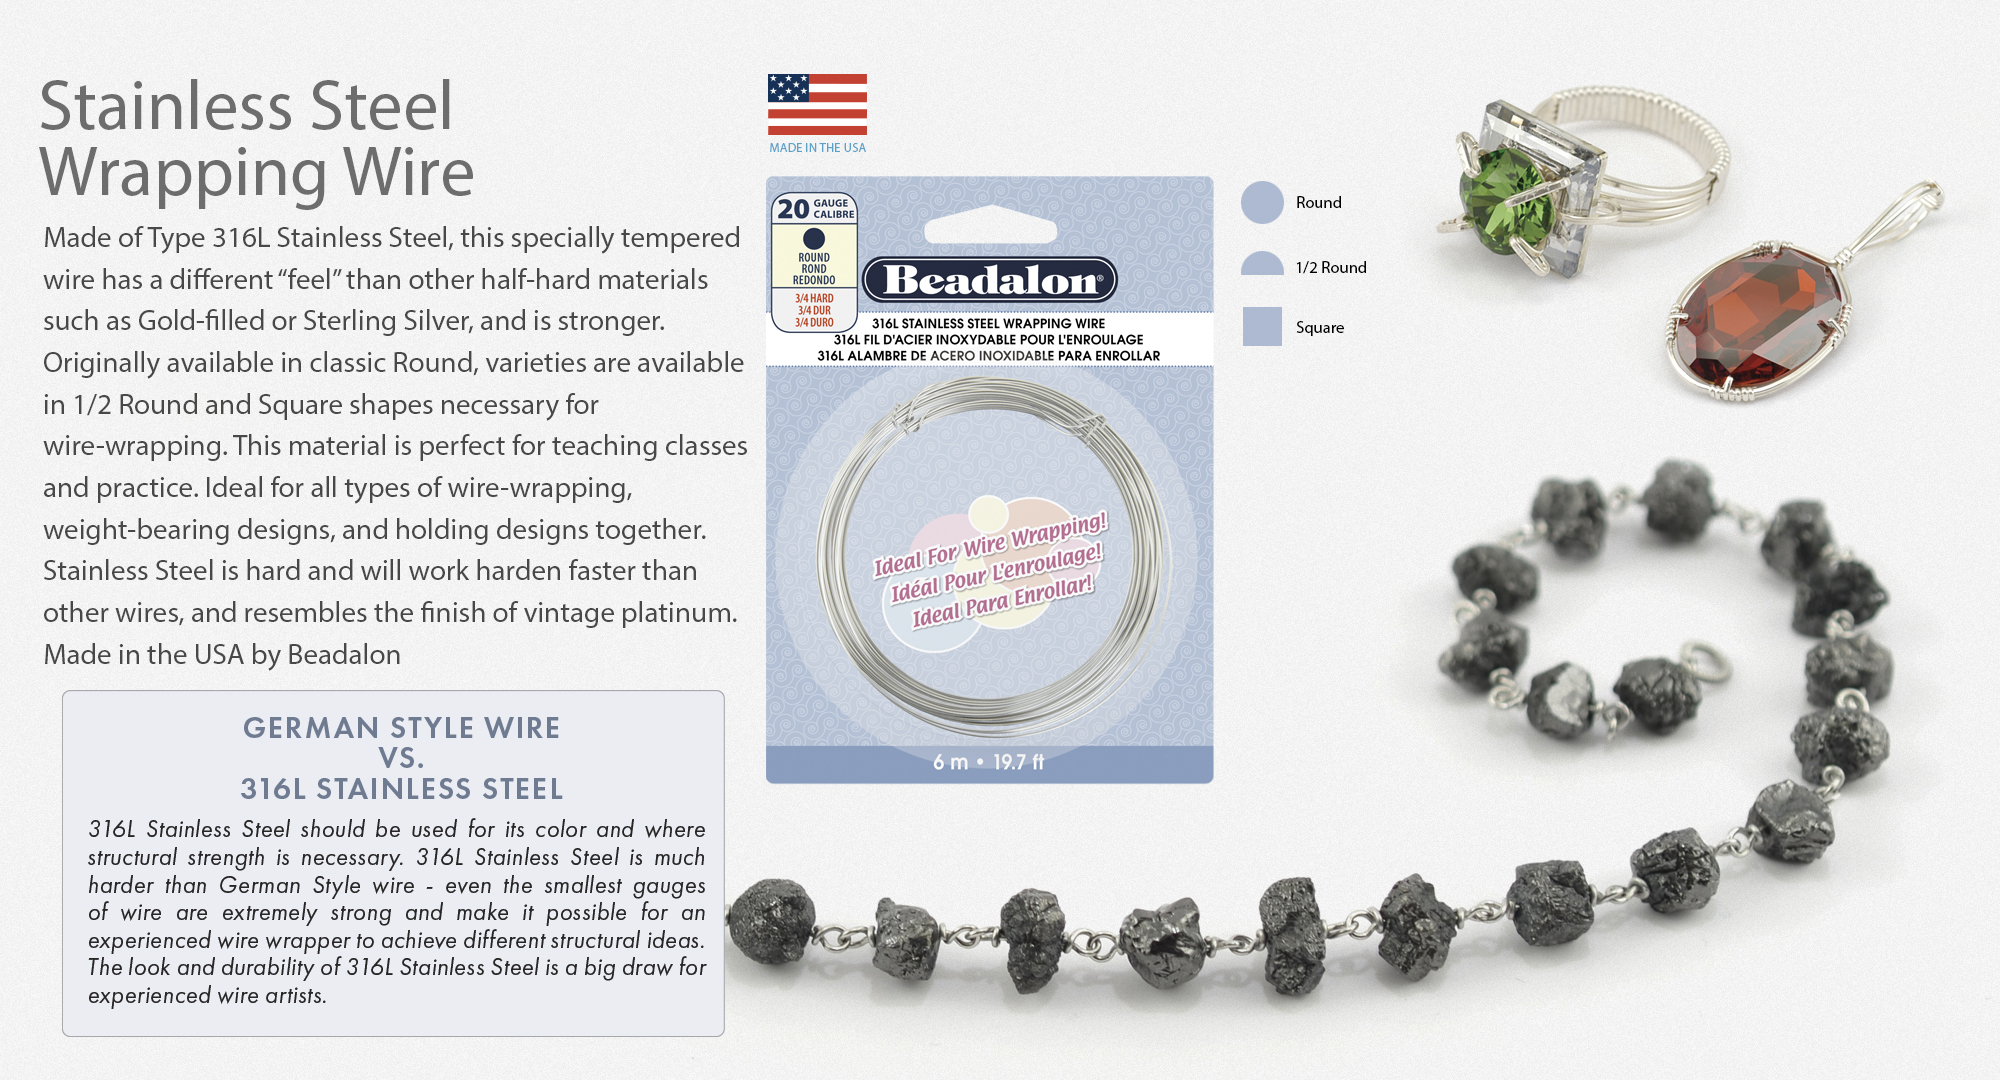 Beadalon - Stainless Steel Wrapping Wire